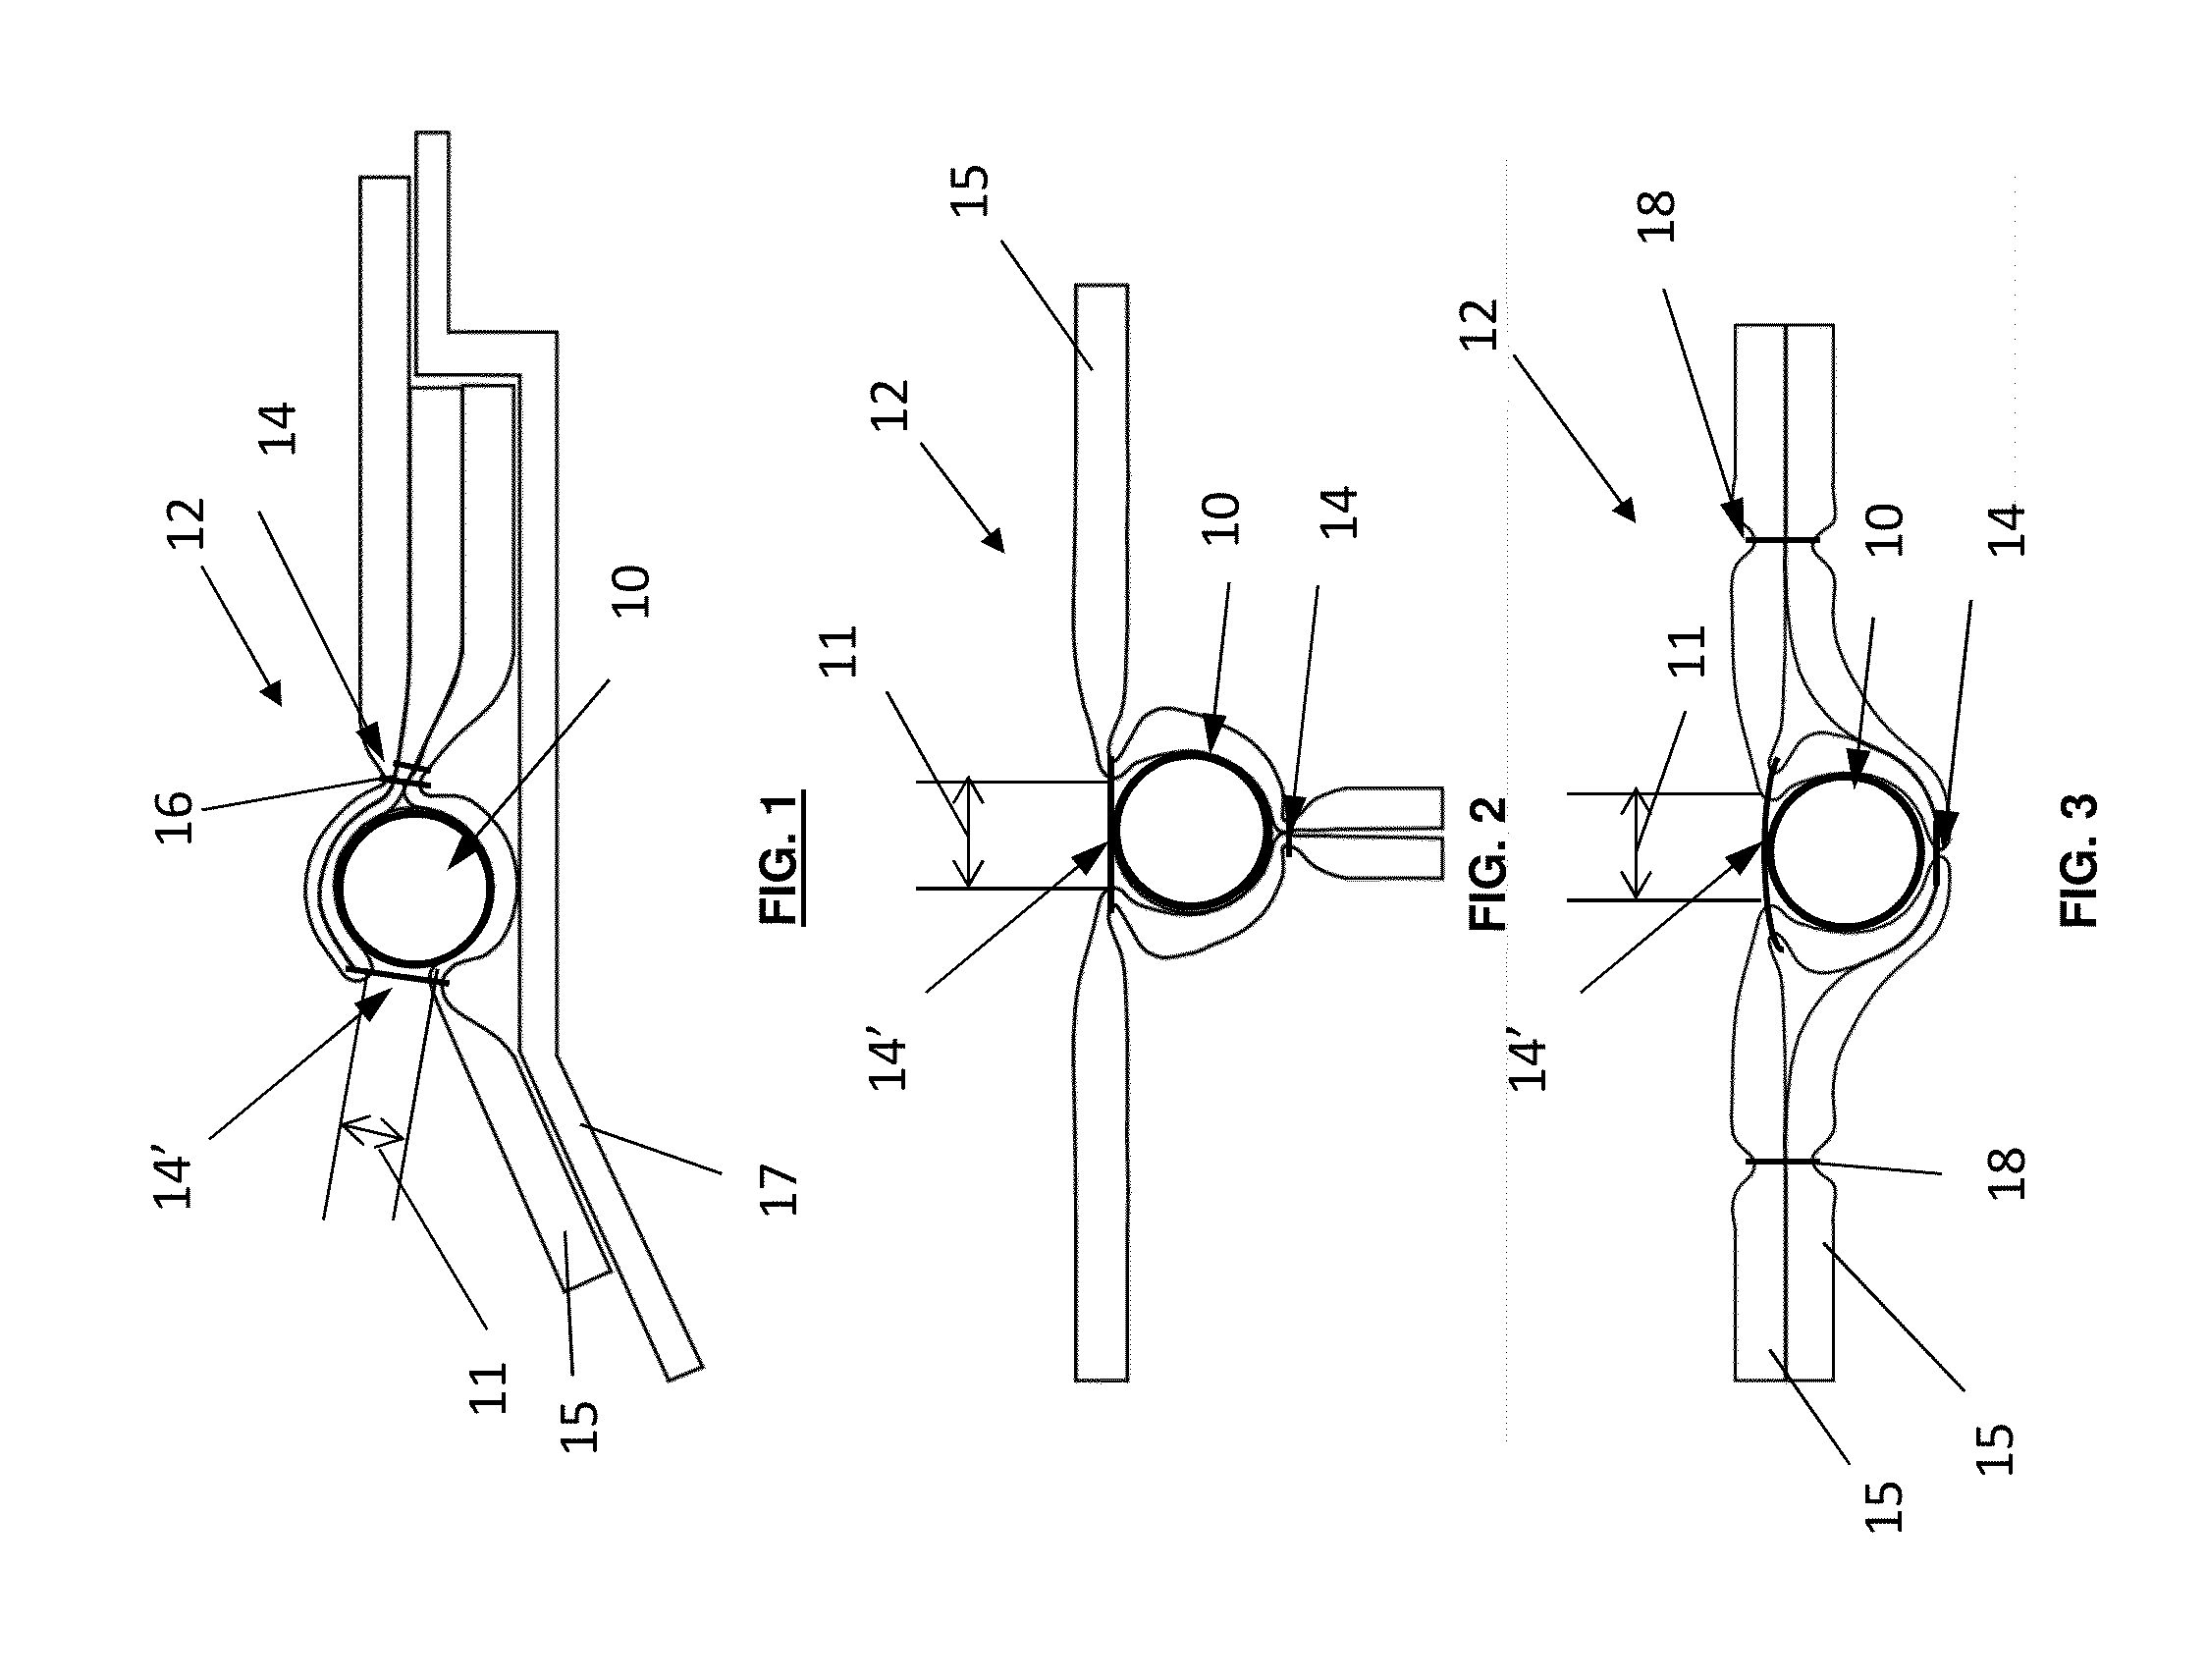 Method for providing illuminated components and components formed from the method